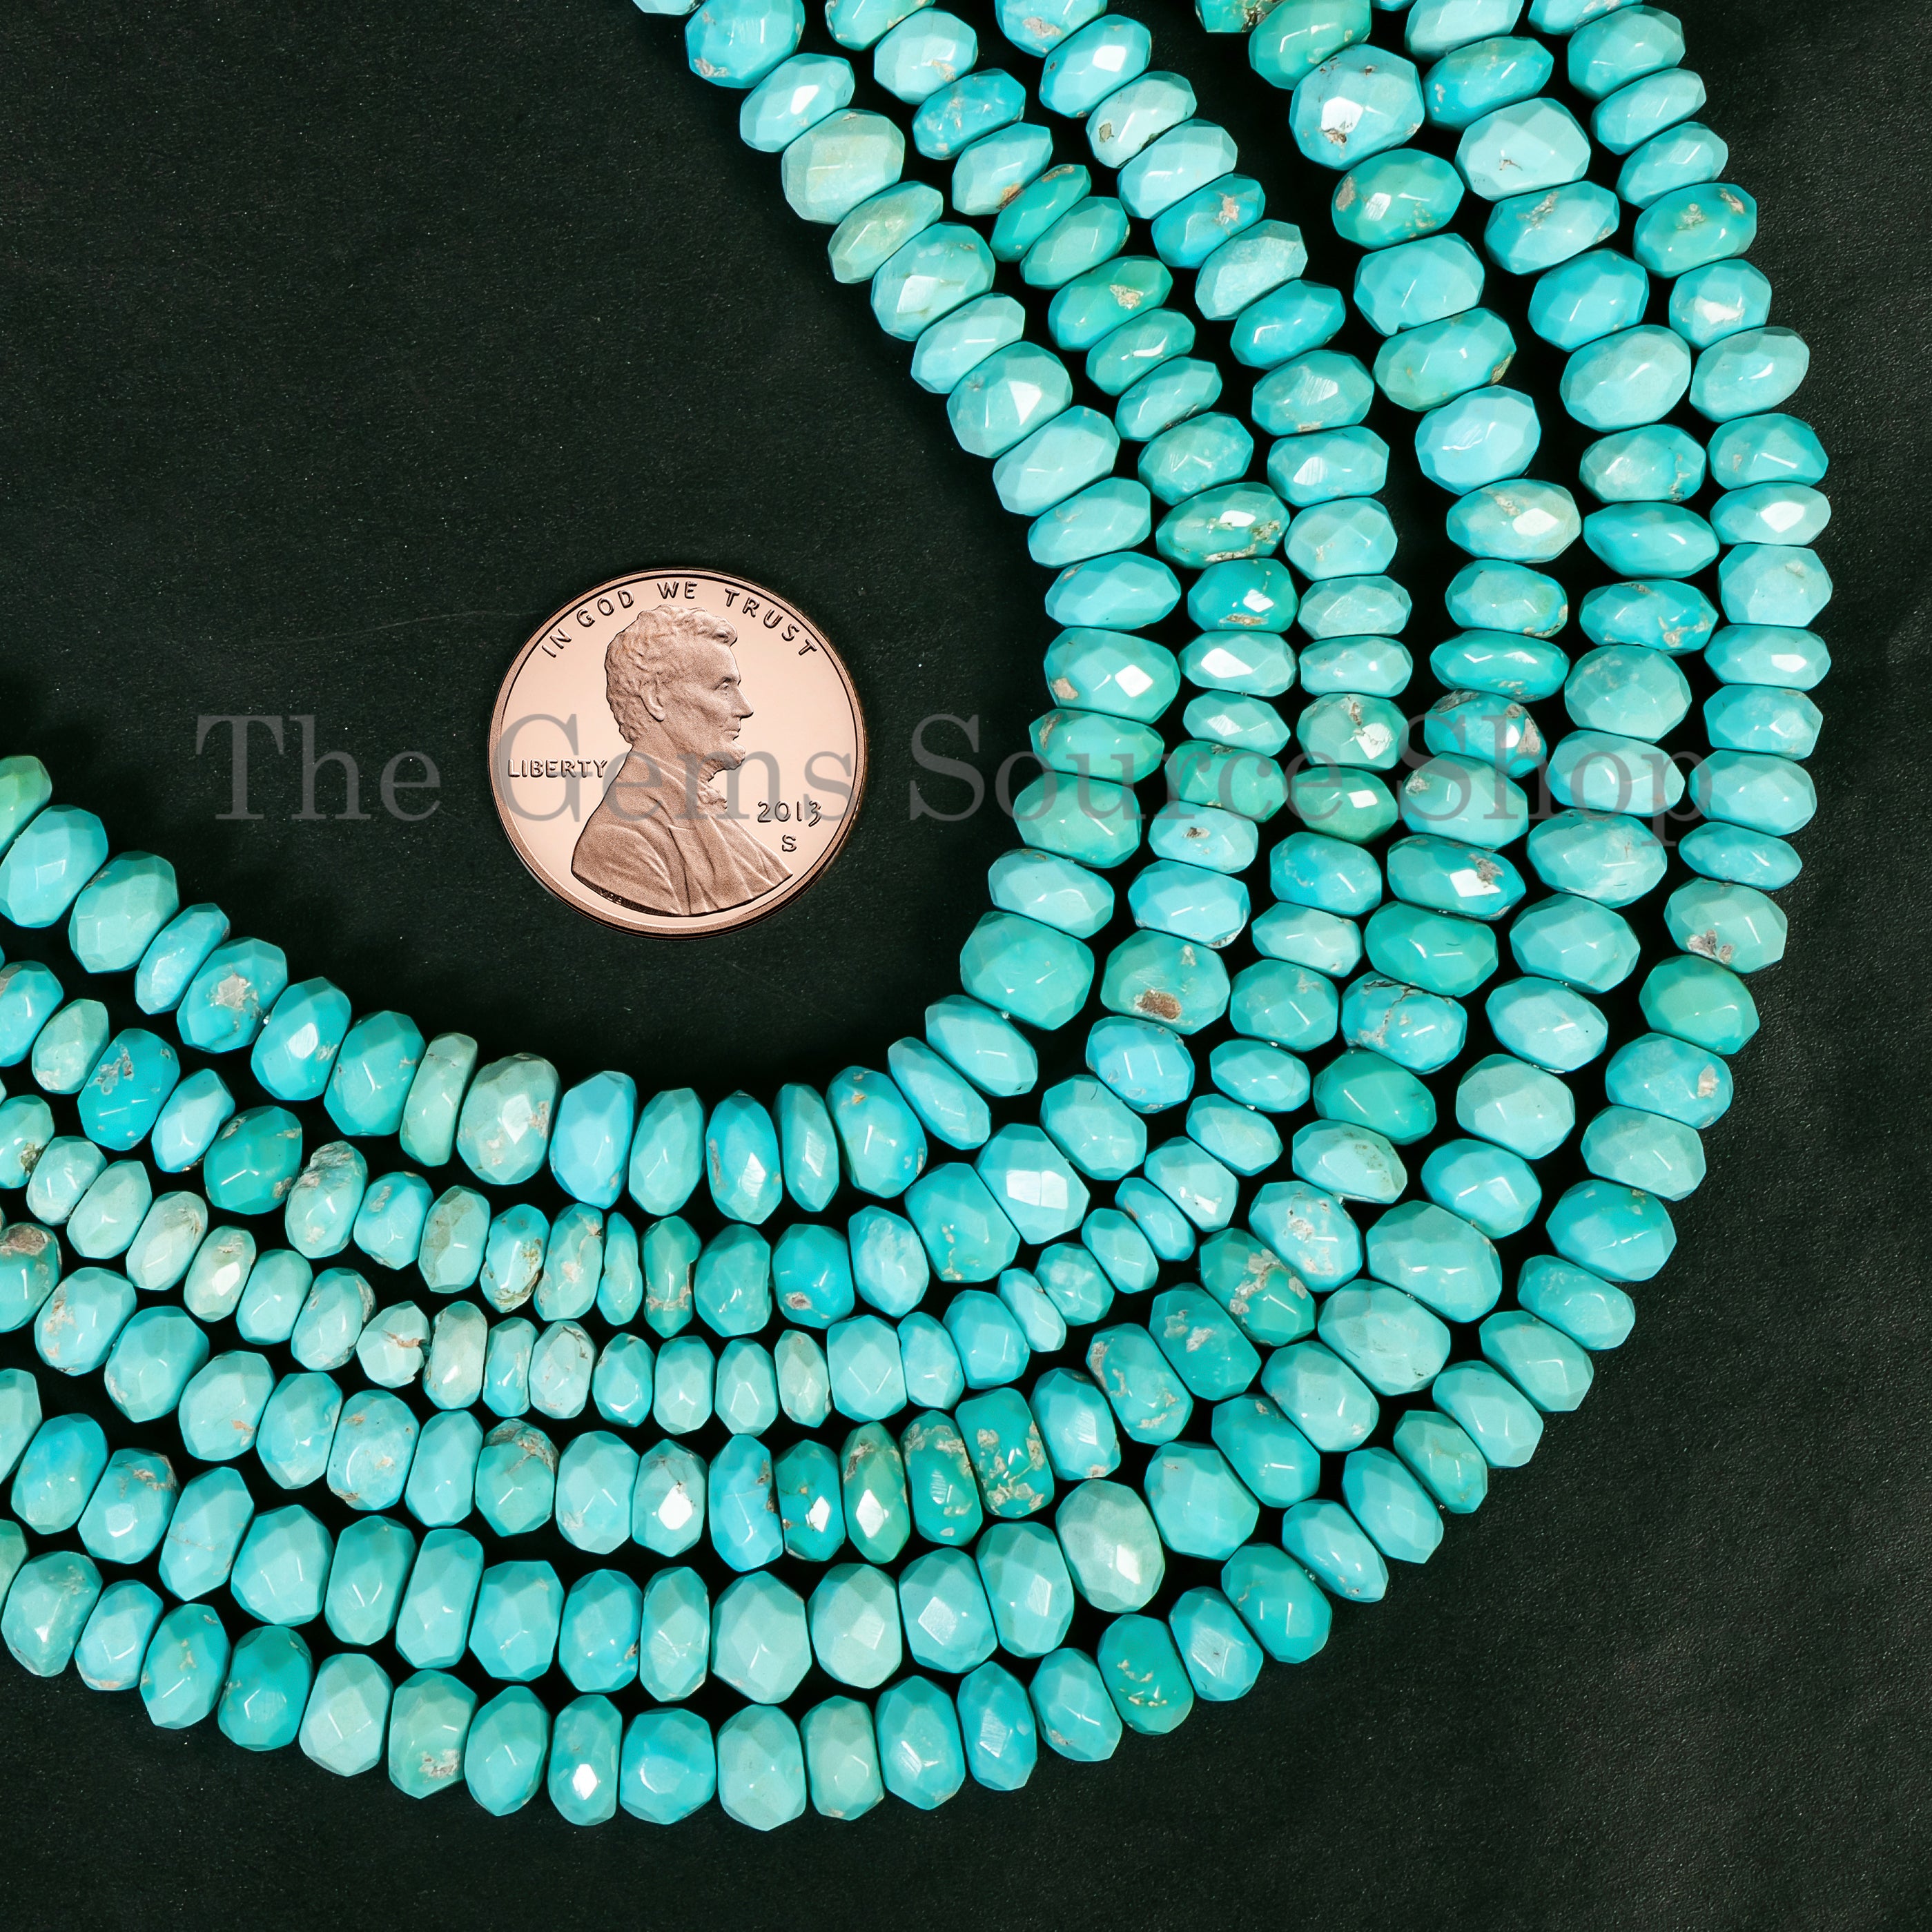 Sleeping Beauty Turquoise Faceted Rondelle Shape Beads TGS-4938